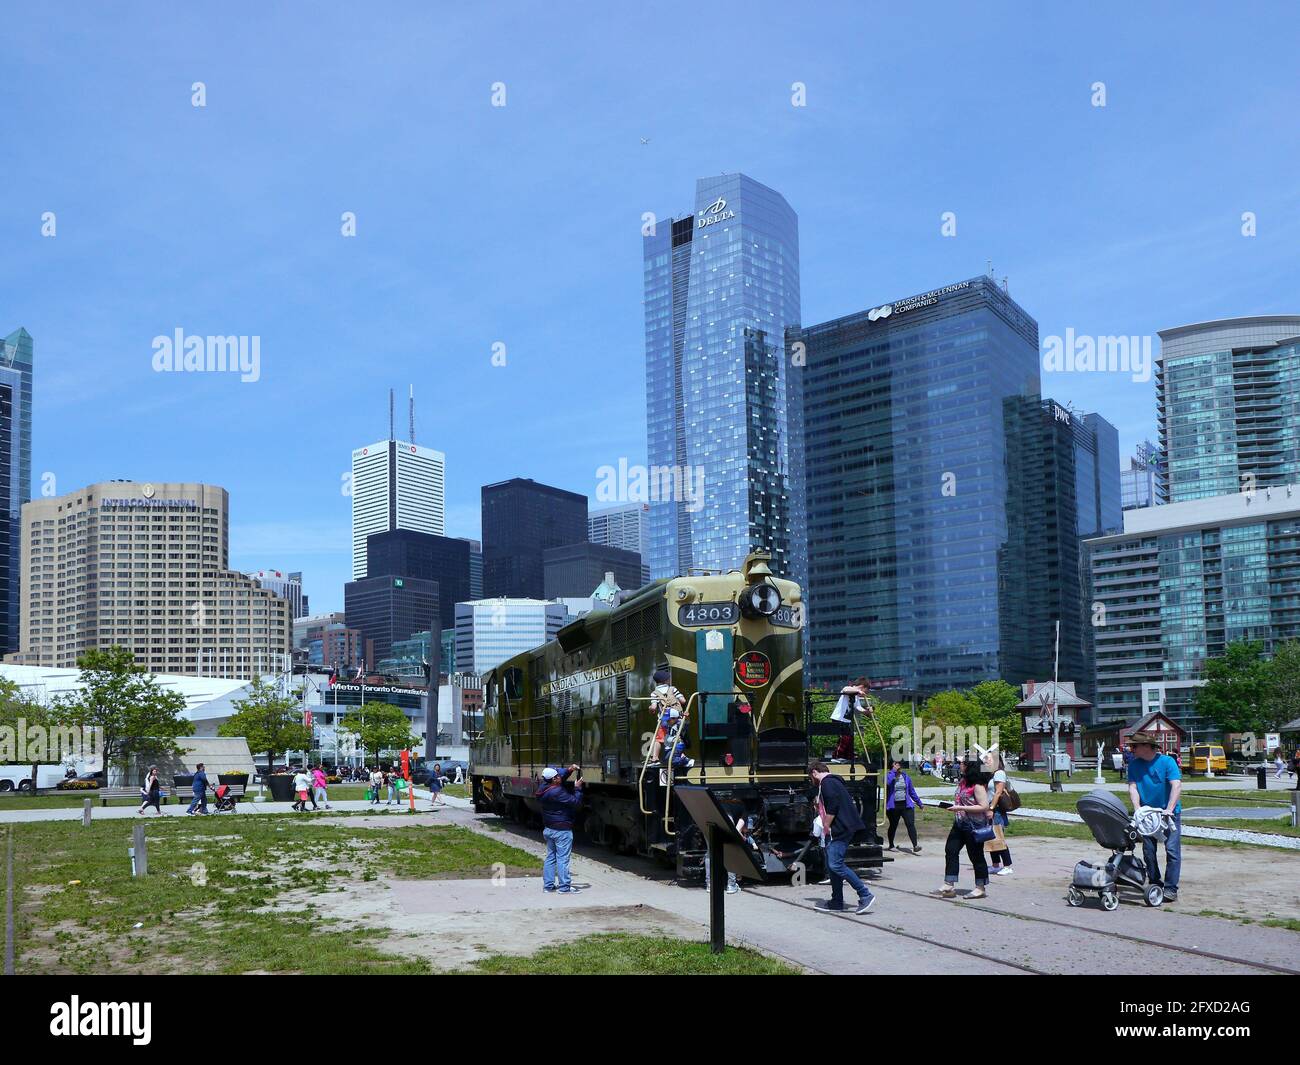 Toronto, Canada - May 28, 2017:  An outdoor display of historic locomotives in downtown Toronto is a popular attraction for children Stock Photo